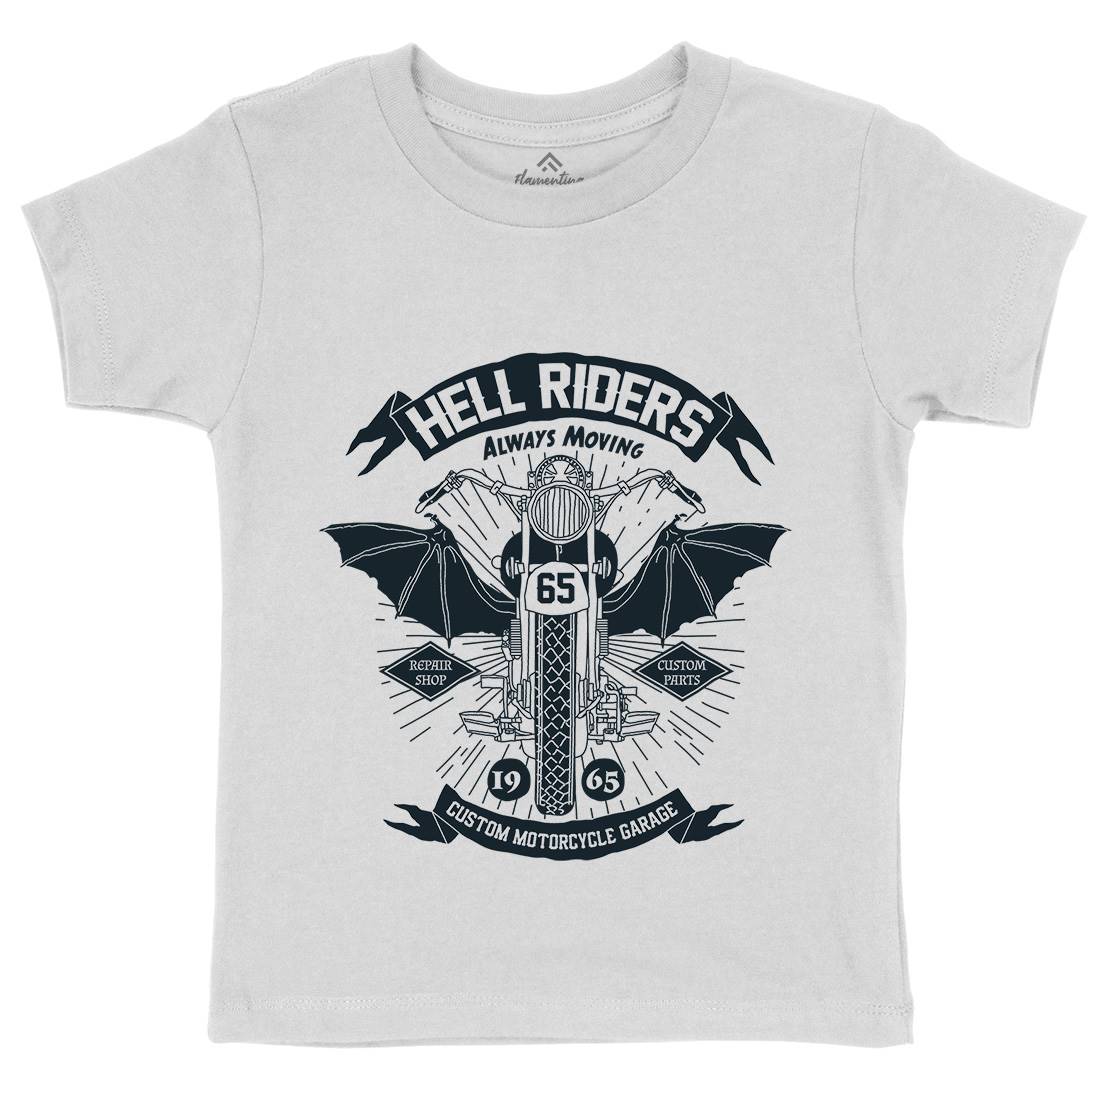 Hell Riders Kids Crew Neck T-Shirt Motorcycles A992